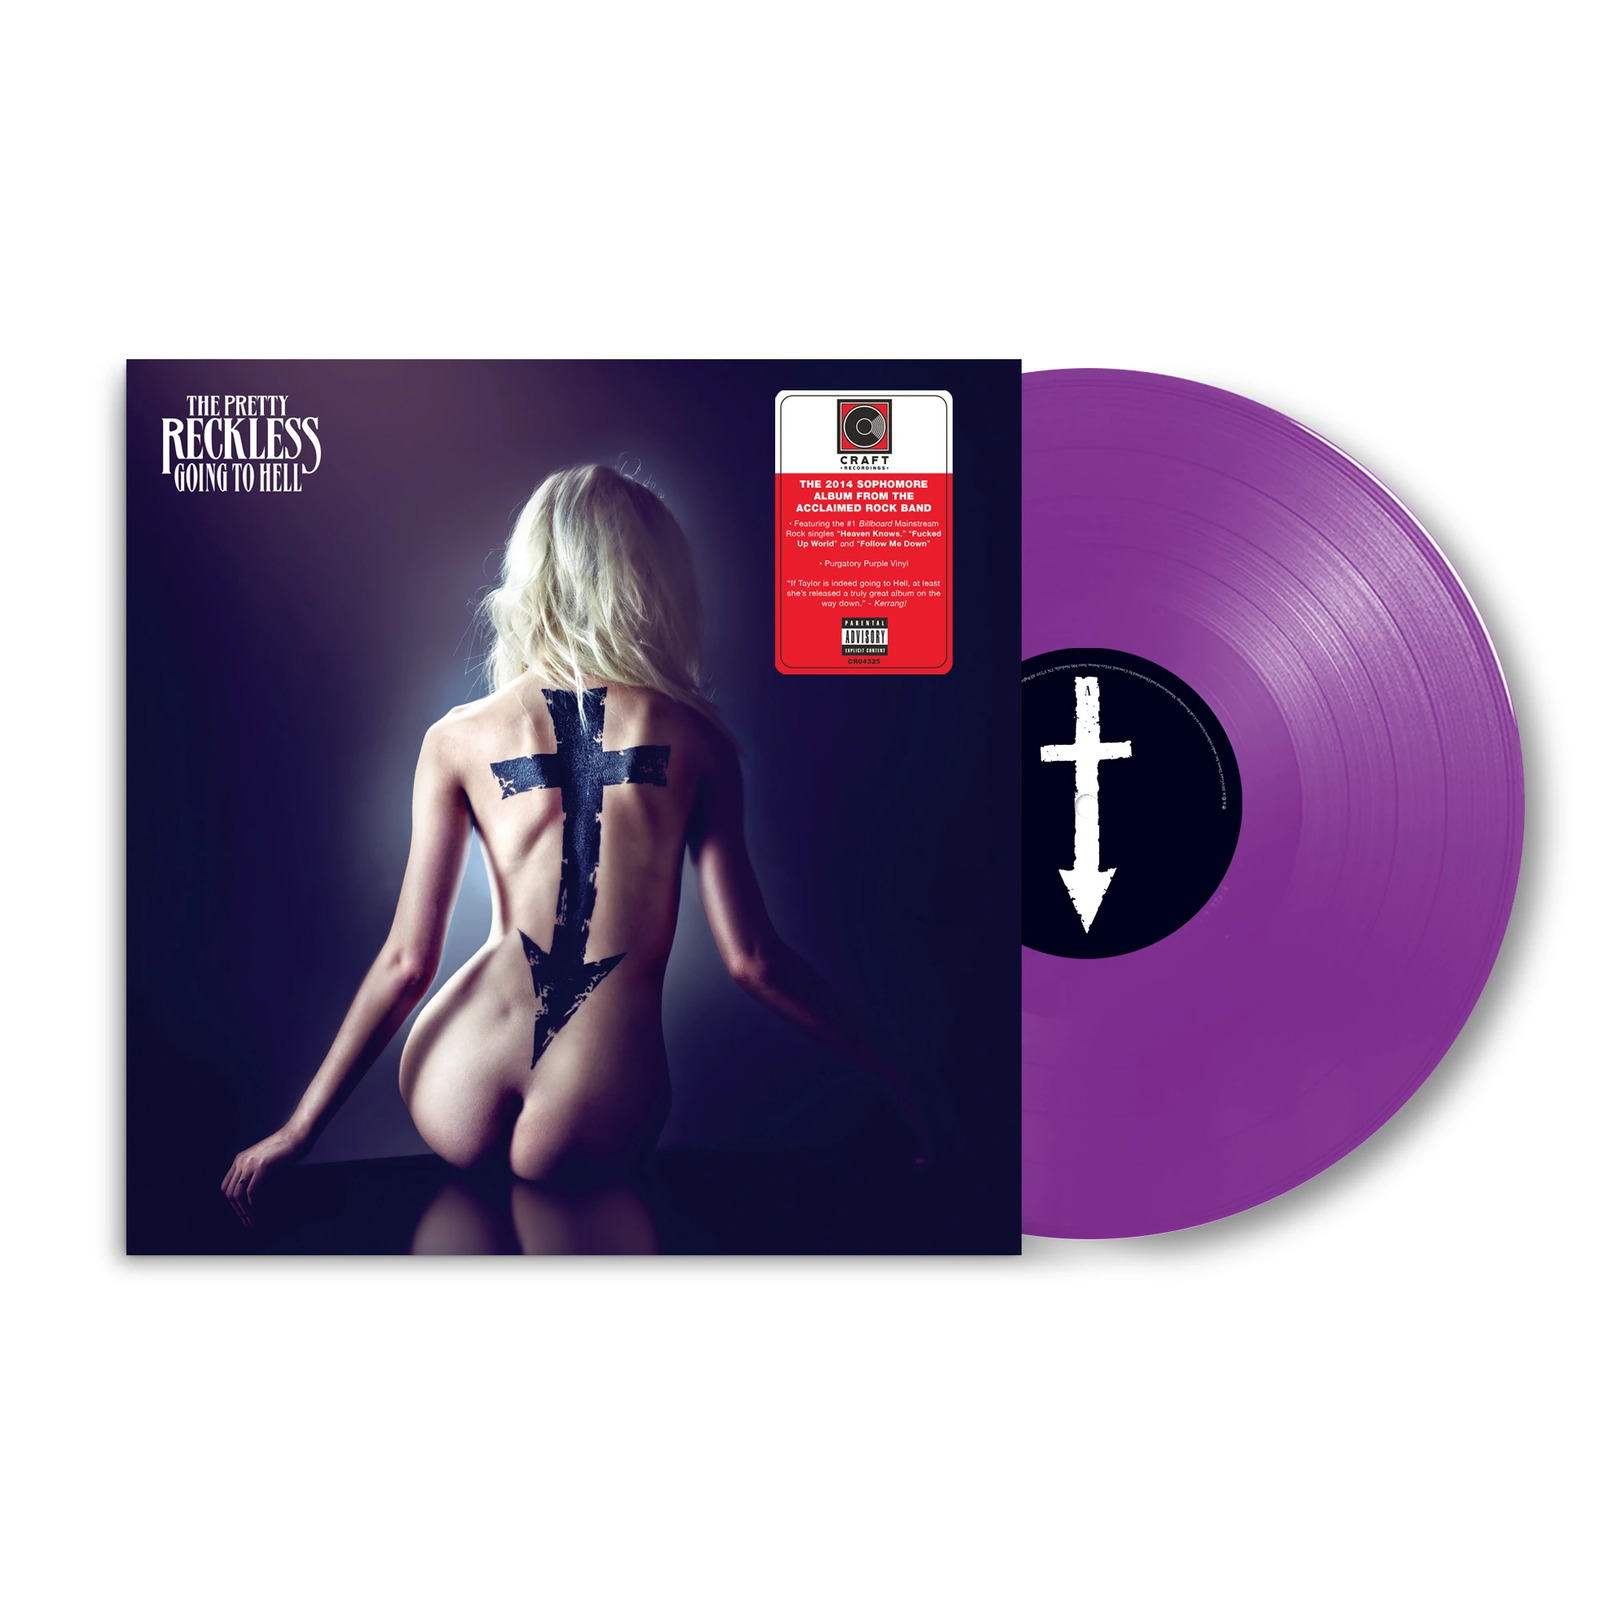 The Pretty Reckless - Going To Hell [Indie-Exclusive Purple Vinyl] NEW Sealed LP